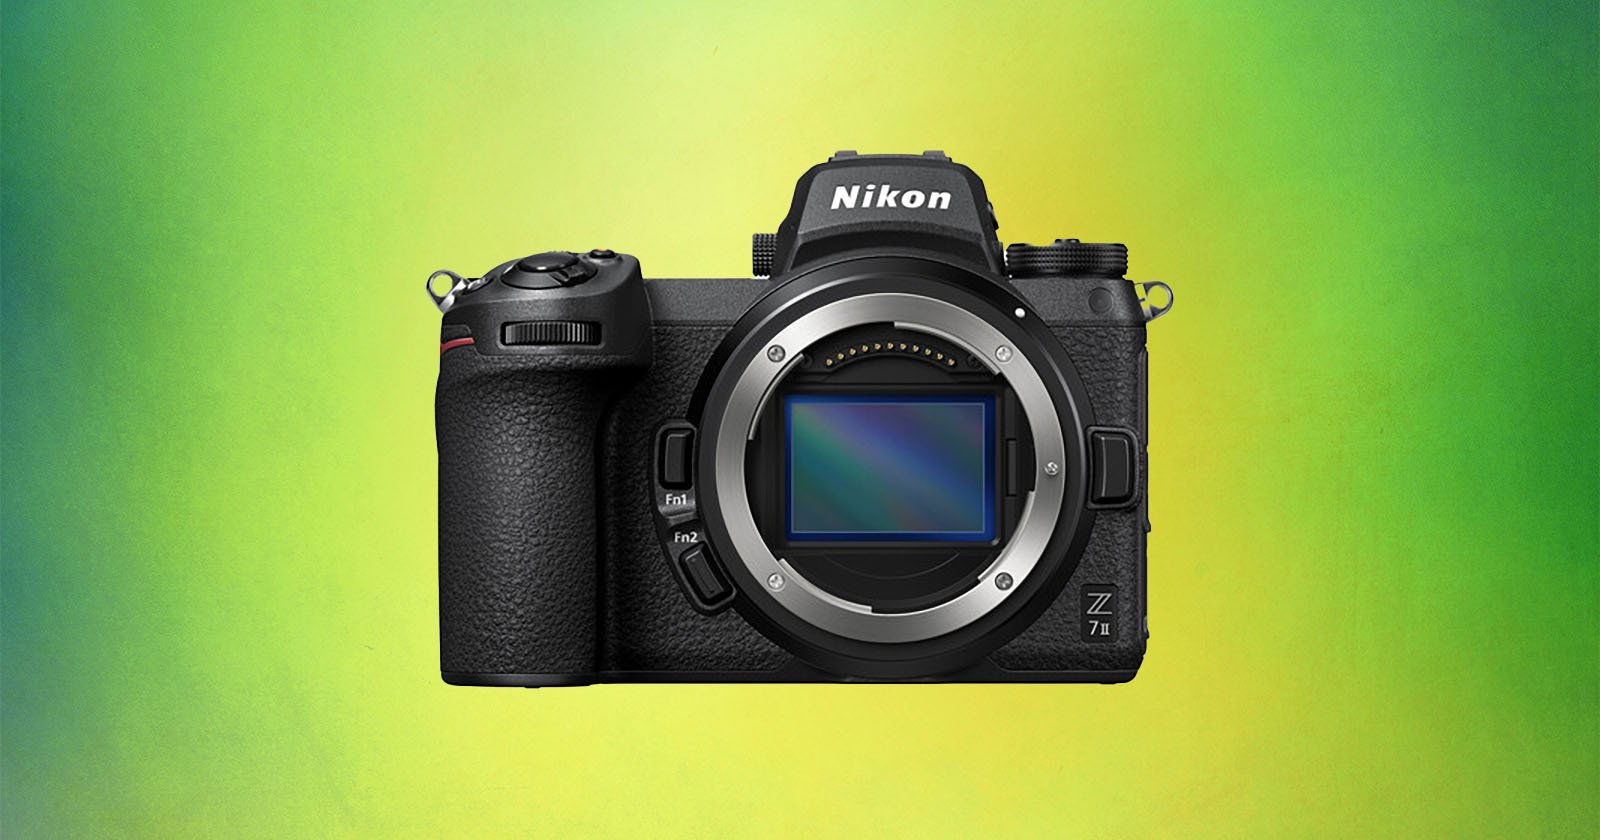  nikon very discounted right now are system 